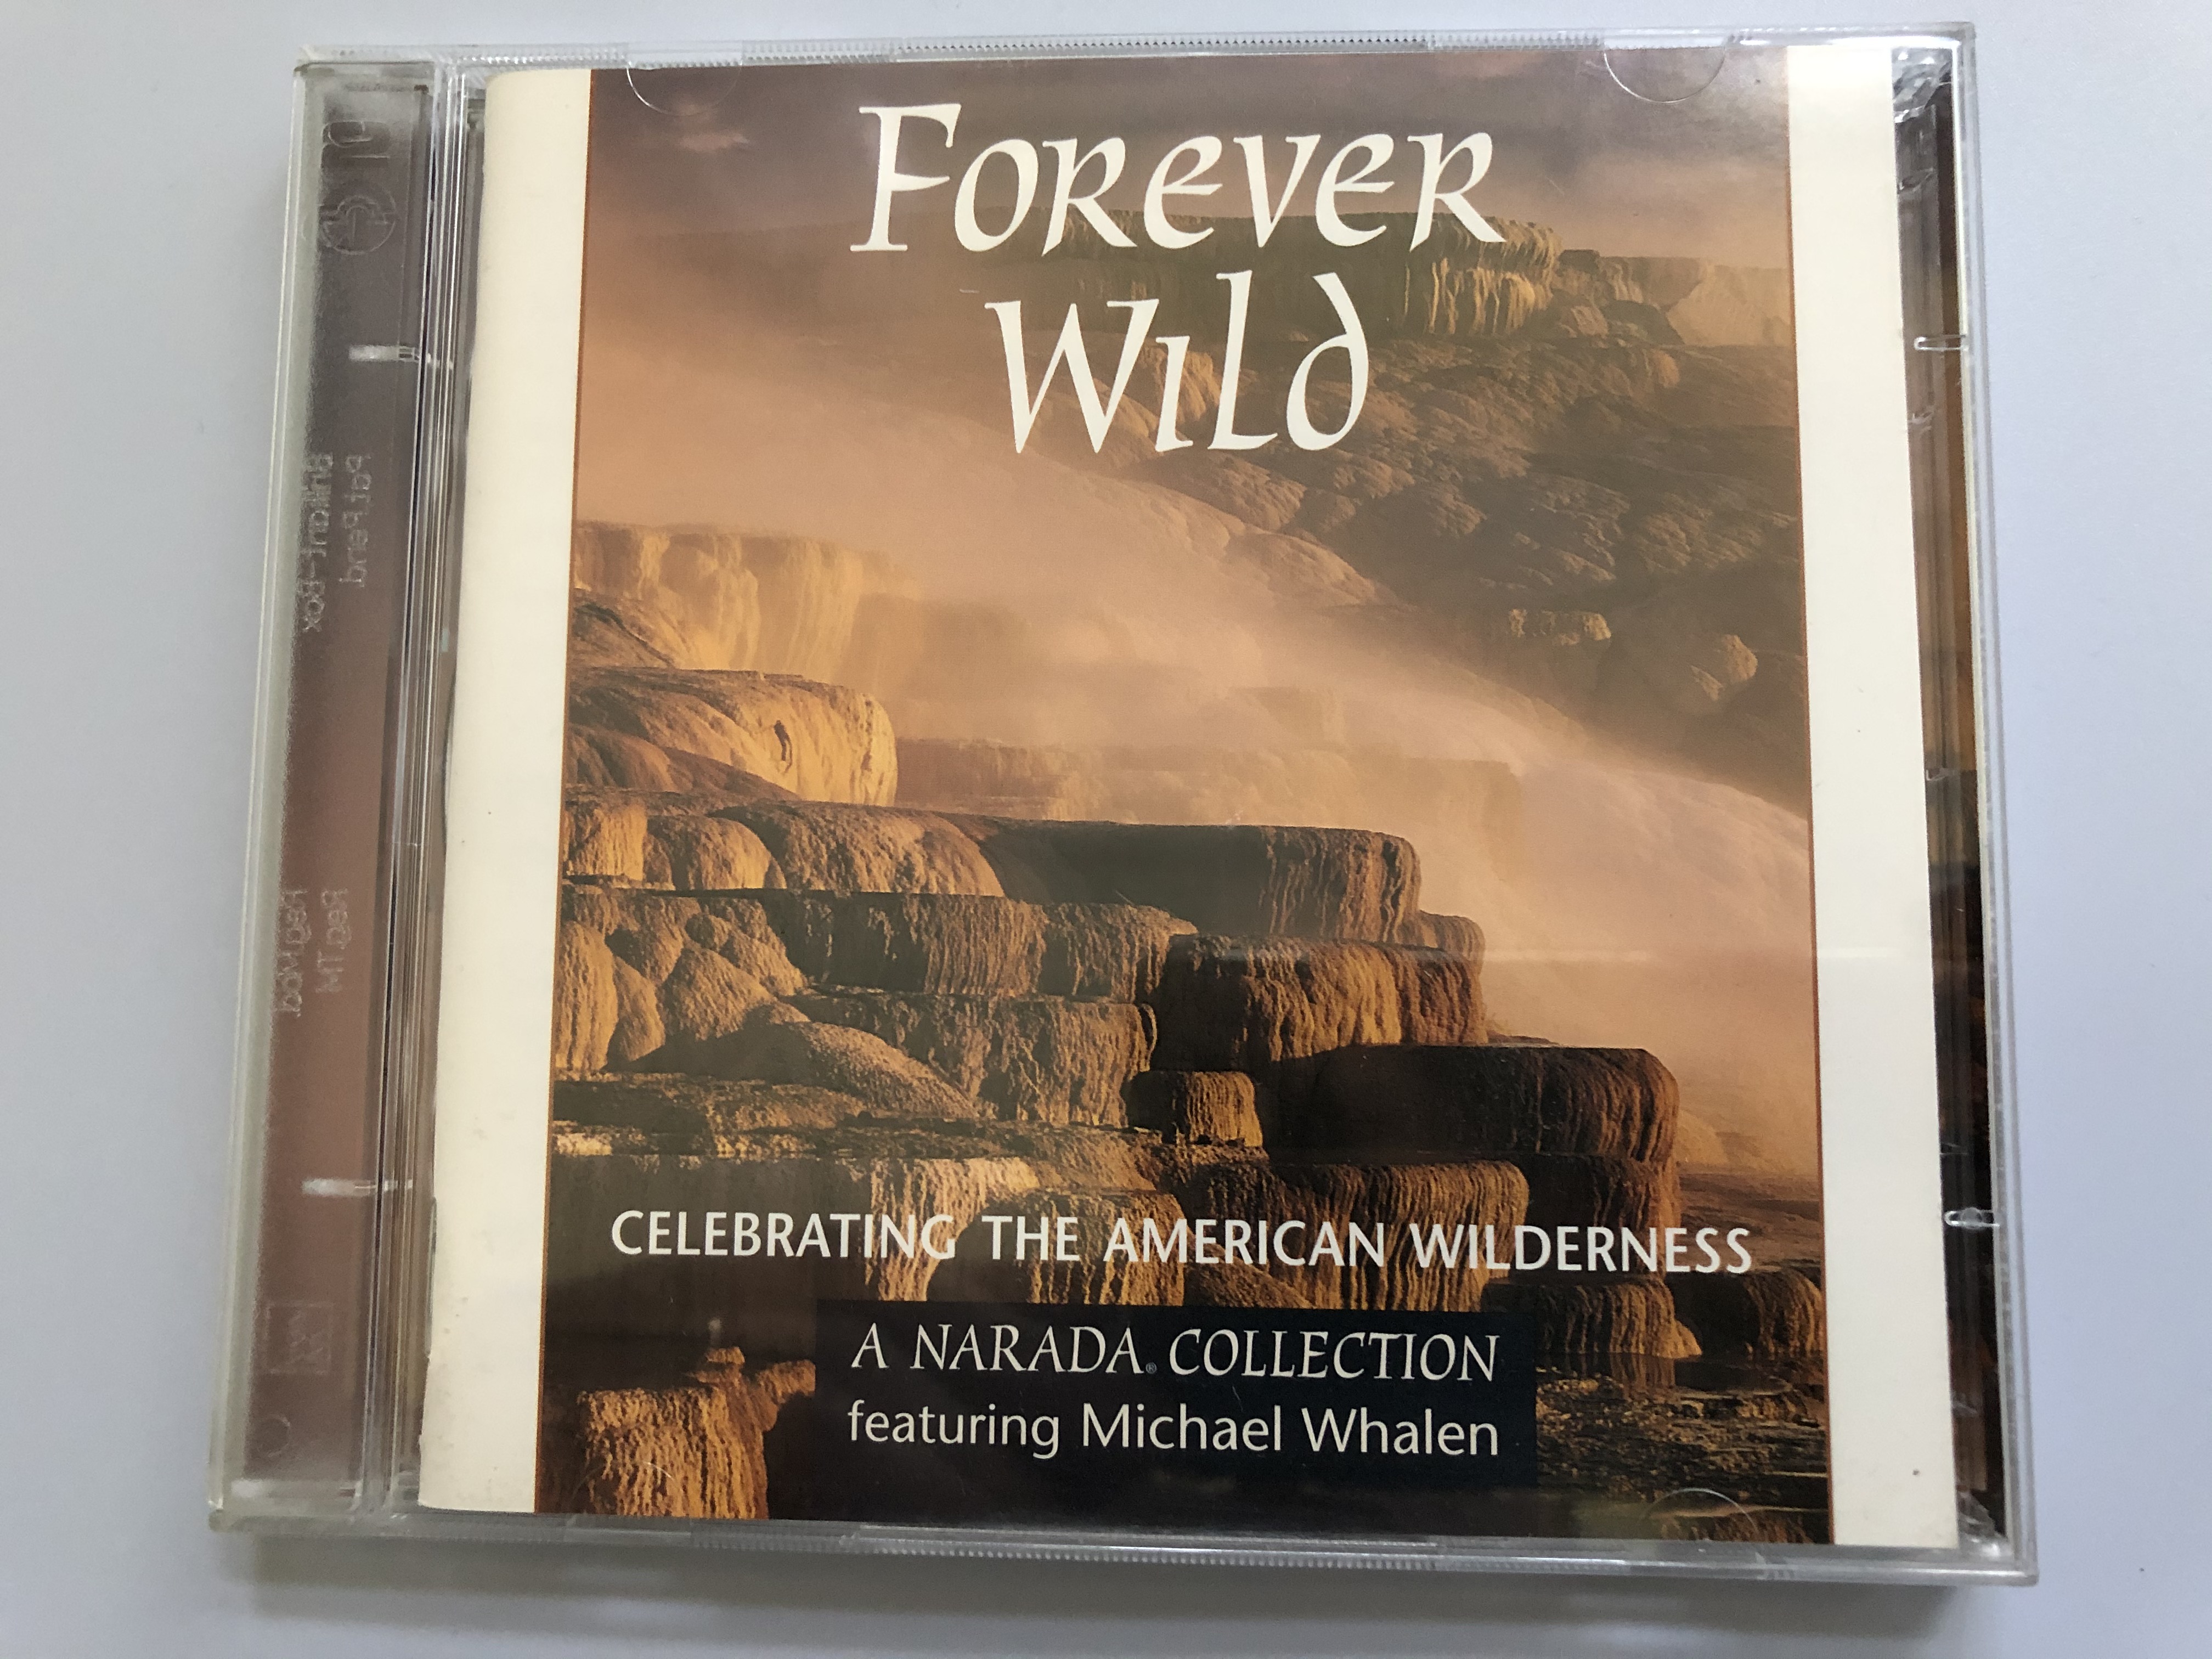 forever-wild-celebrating-the-american-wilderness-a-narada-collection-featuring-michael-whalen-narada-2x-audio-cd-1996-nd-63926-1-.jpg